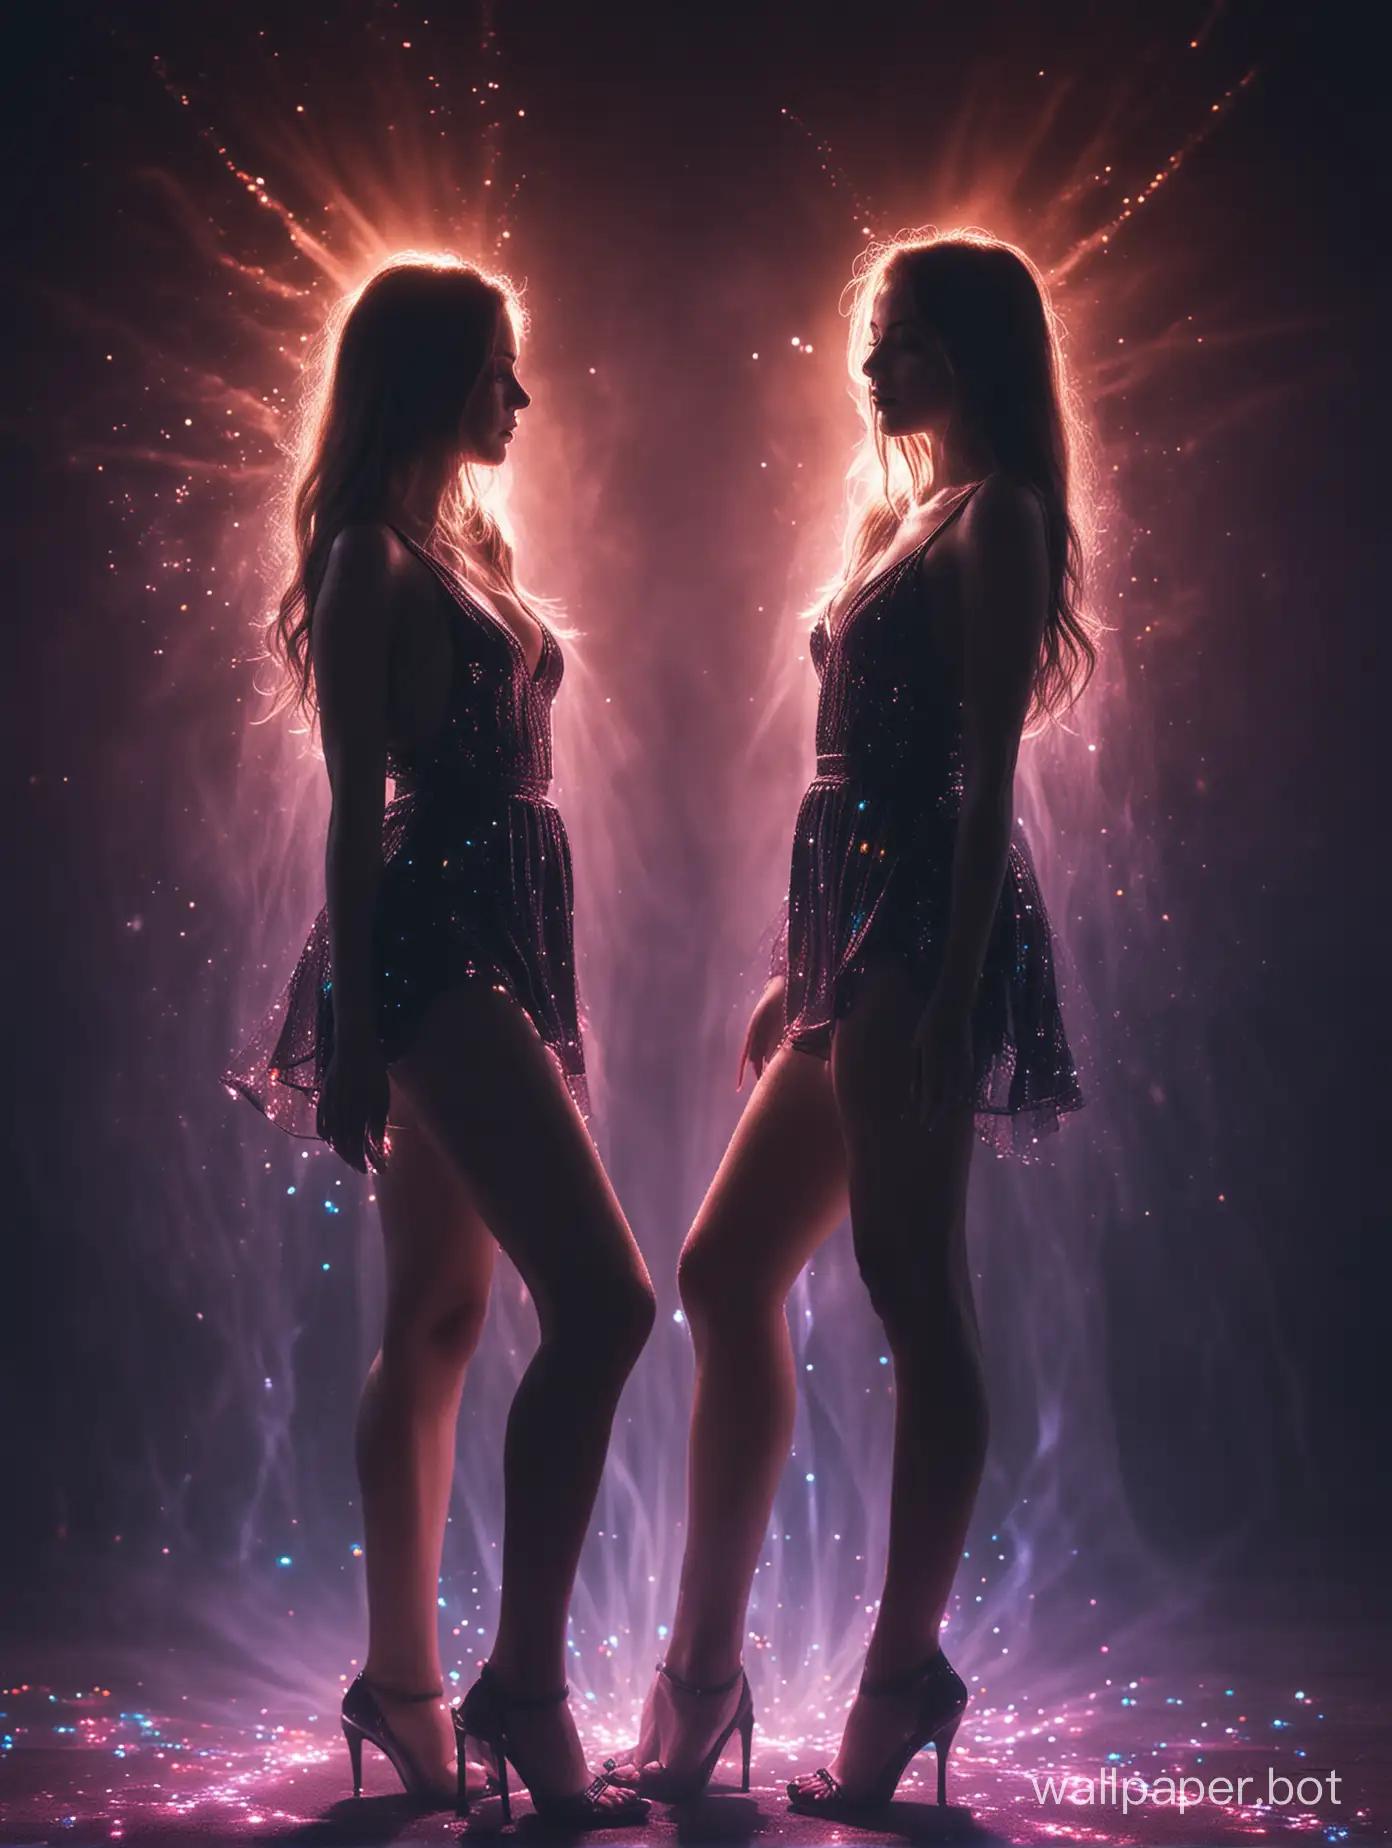 Enchanting-Twilight-Encounter-Two-Mystical-Girls-amid-Vibrant-Contrasts-and-Magical-Illumination